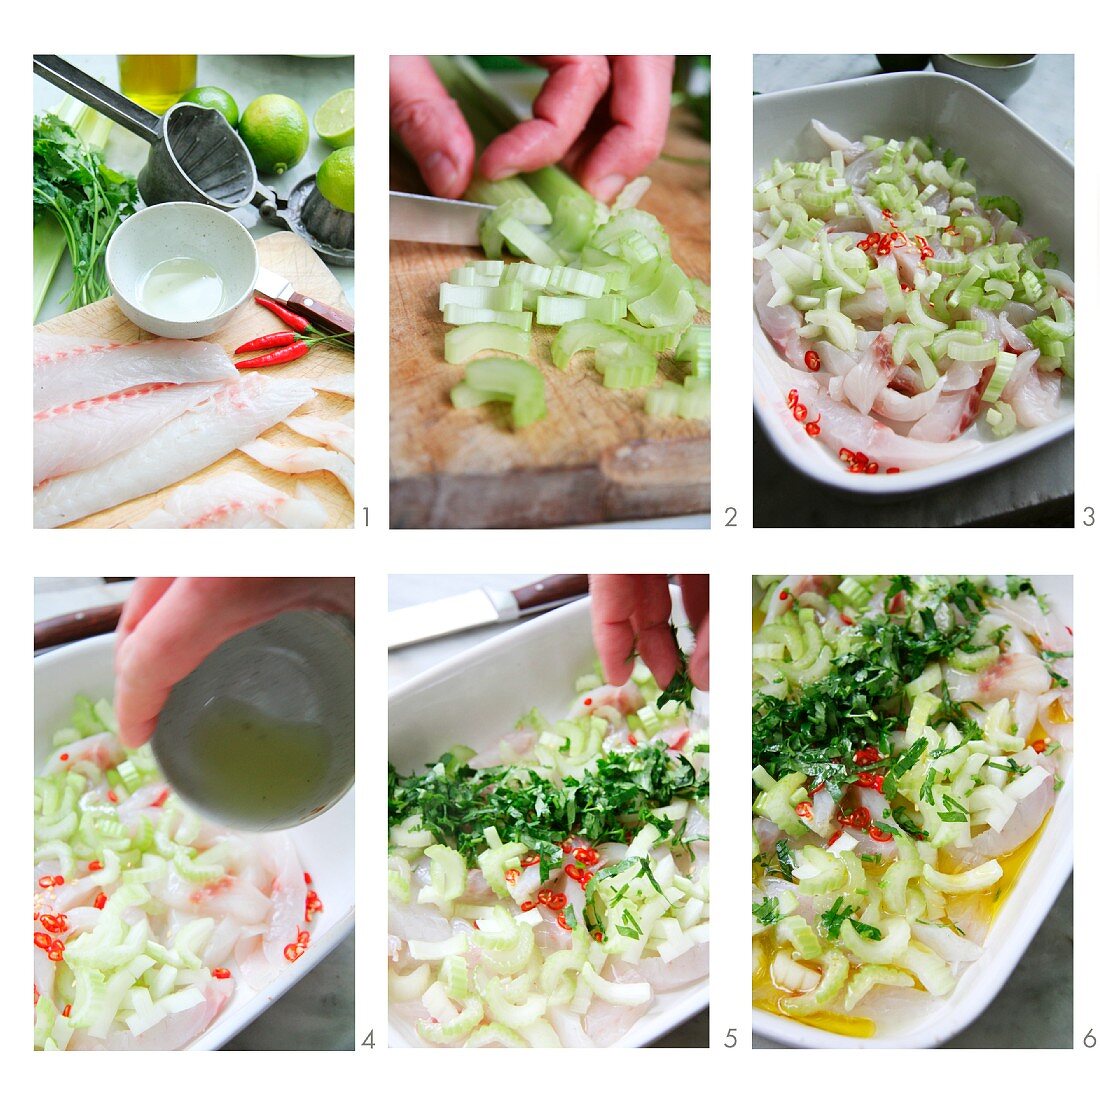 Ceviche with celery being made